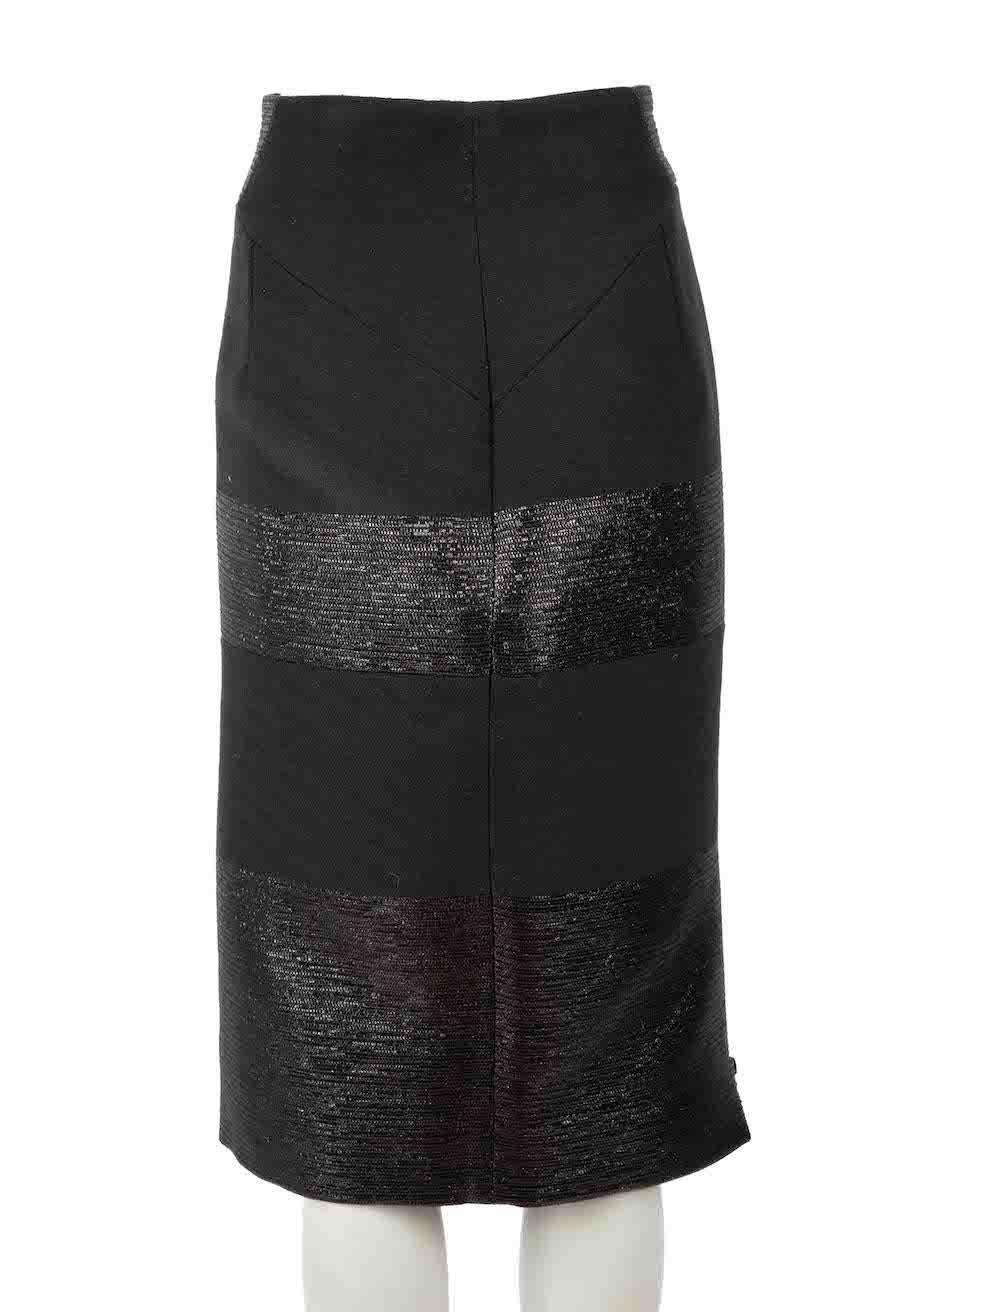 Amanda Wakeley Black Textured Pencil Skirt Size XL In Good Condition For Sale In London, GB